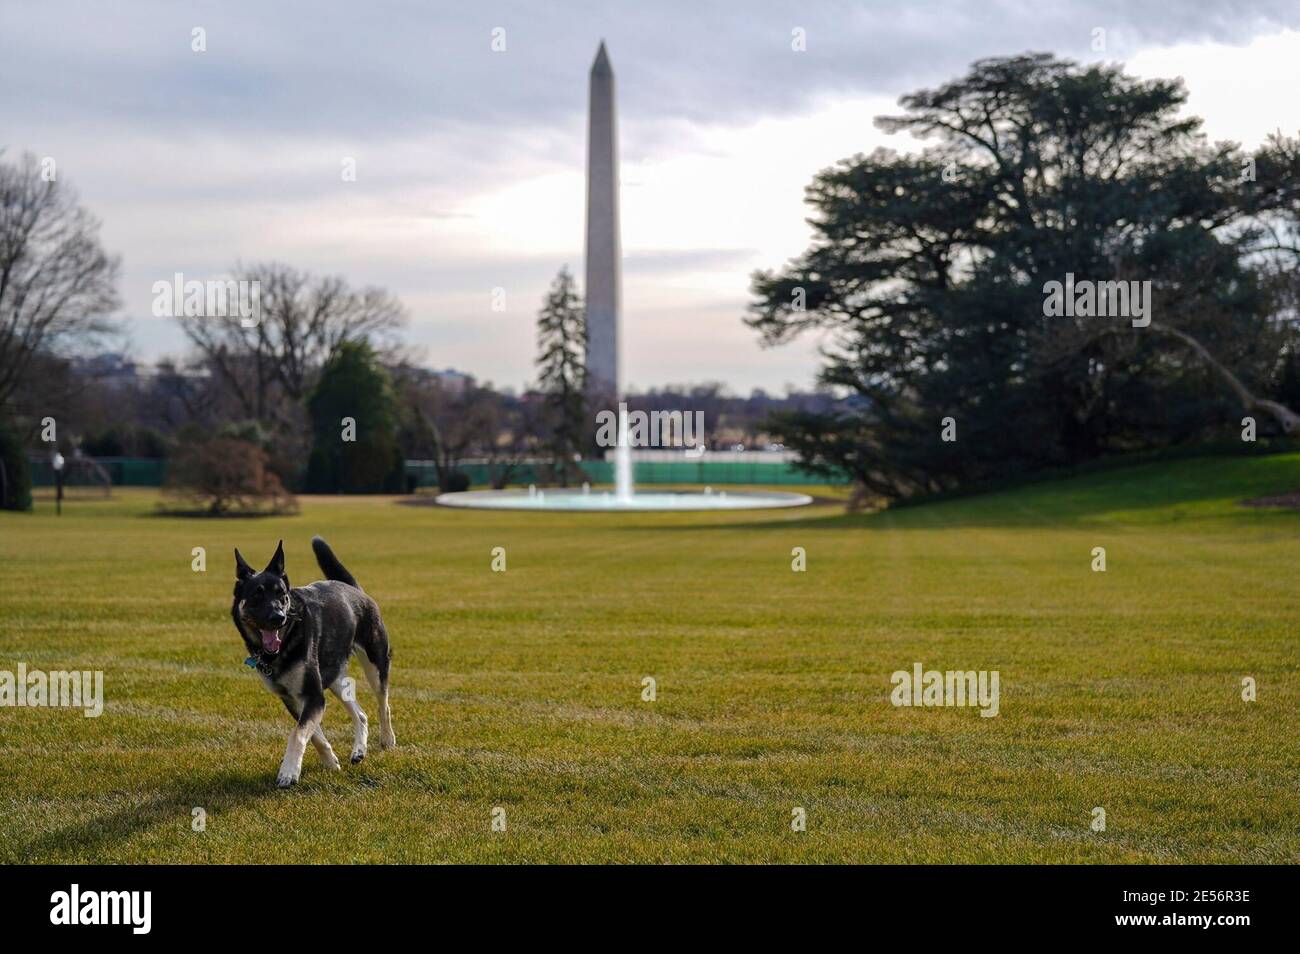 Major Biden, a rescue dog owned by U.S President Joe Biden runs around the South Lawn of the White House January 24, 2021 in Washington, D.C. The Bidens adopted the German shepherd in 2018 from the Delaware Humane Association. Stock Photo